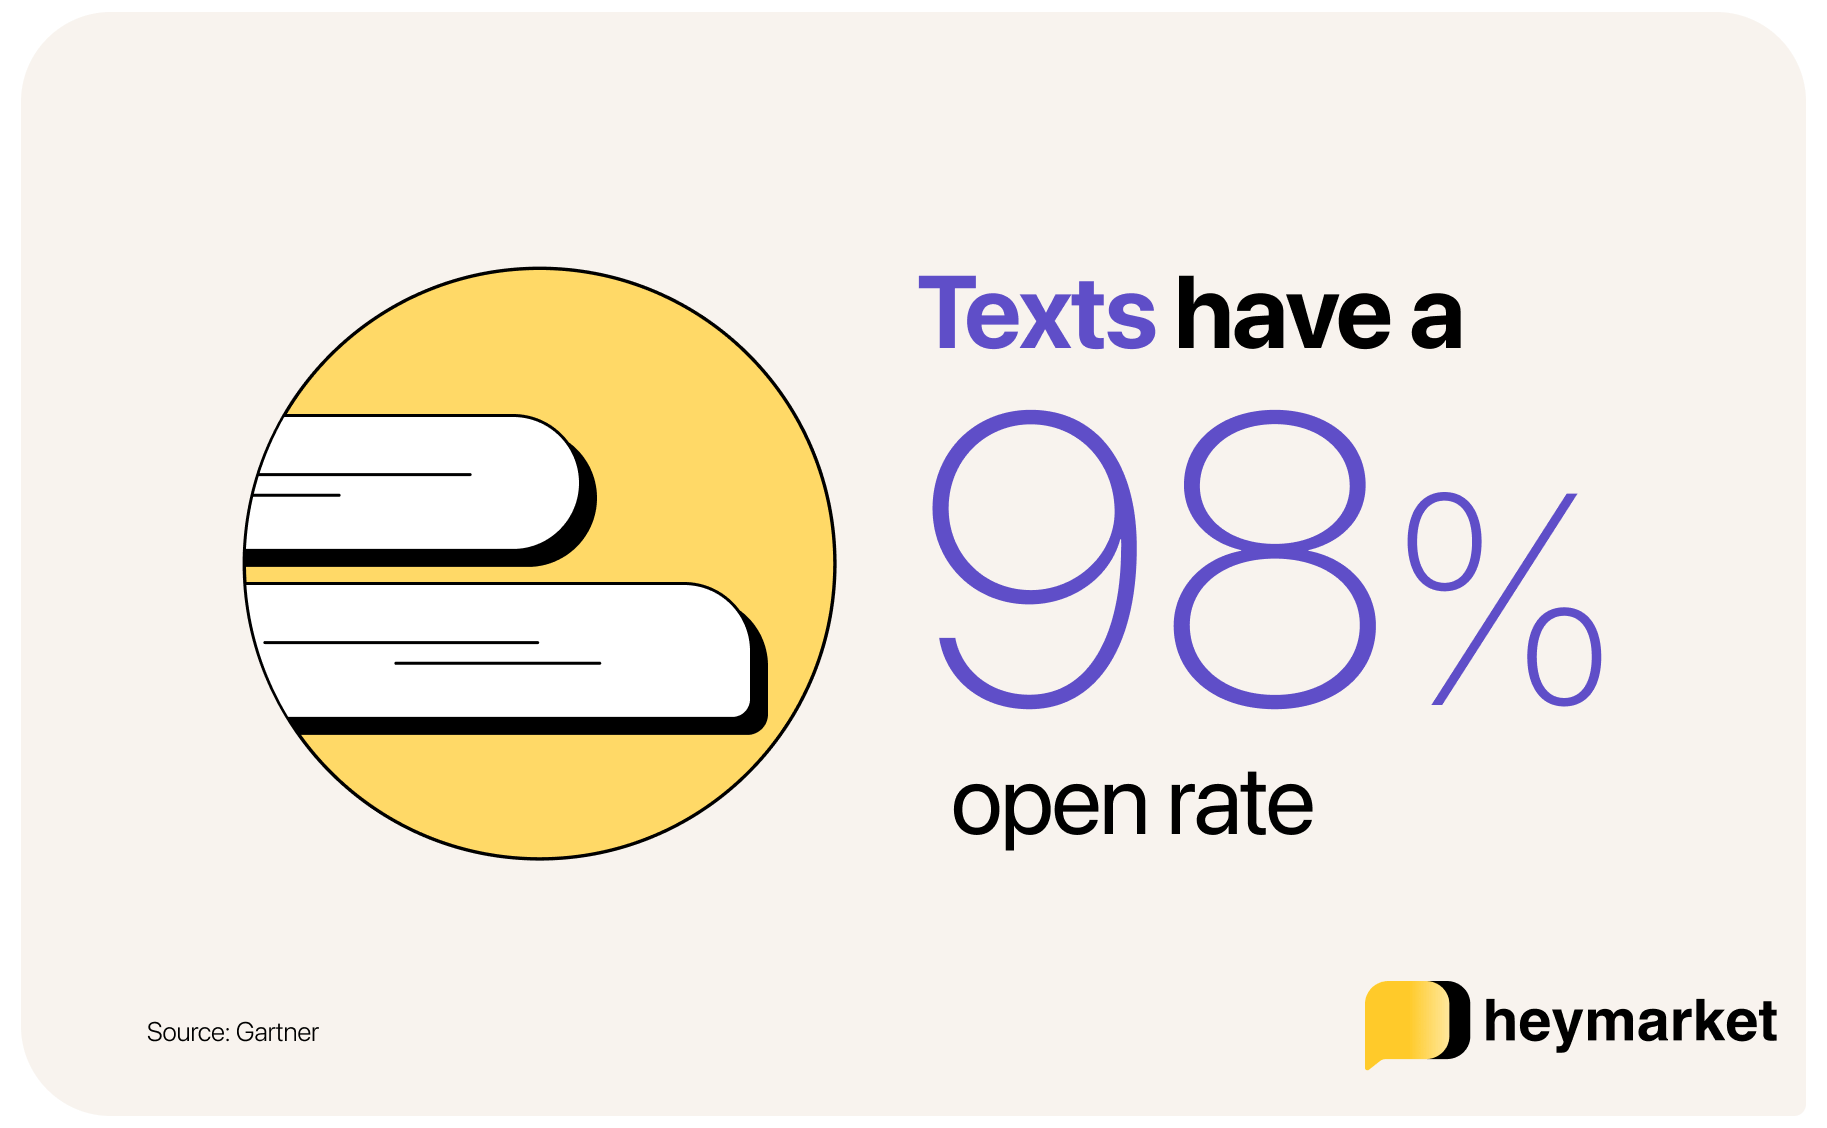 Texts have a 98% open rate